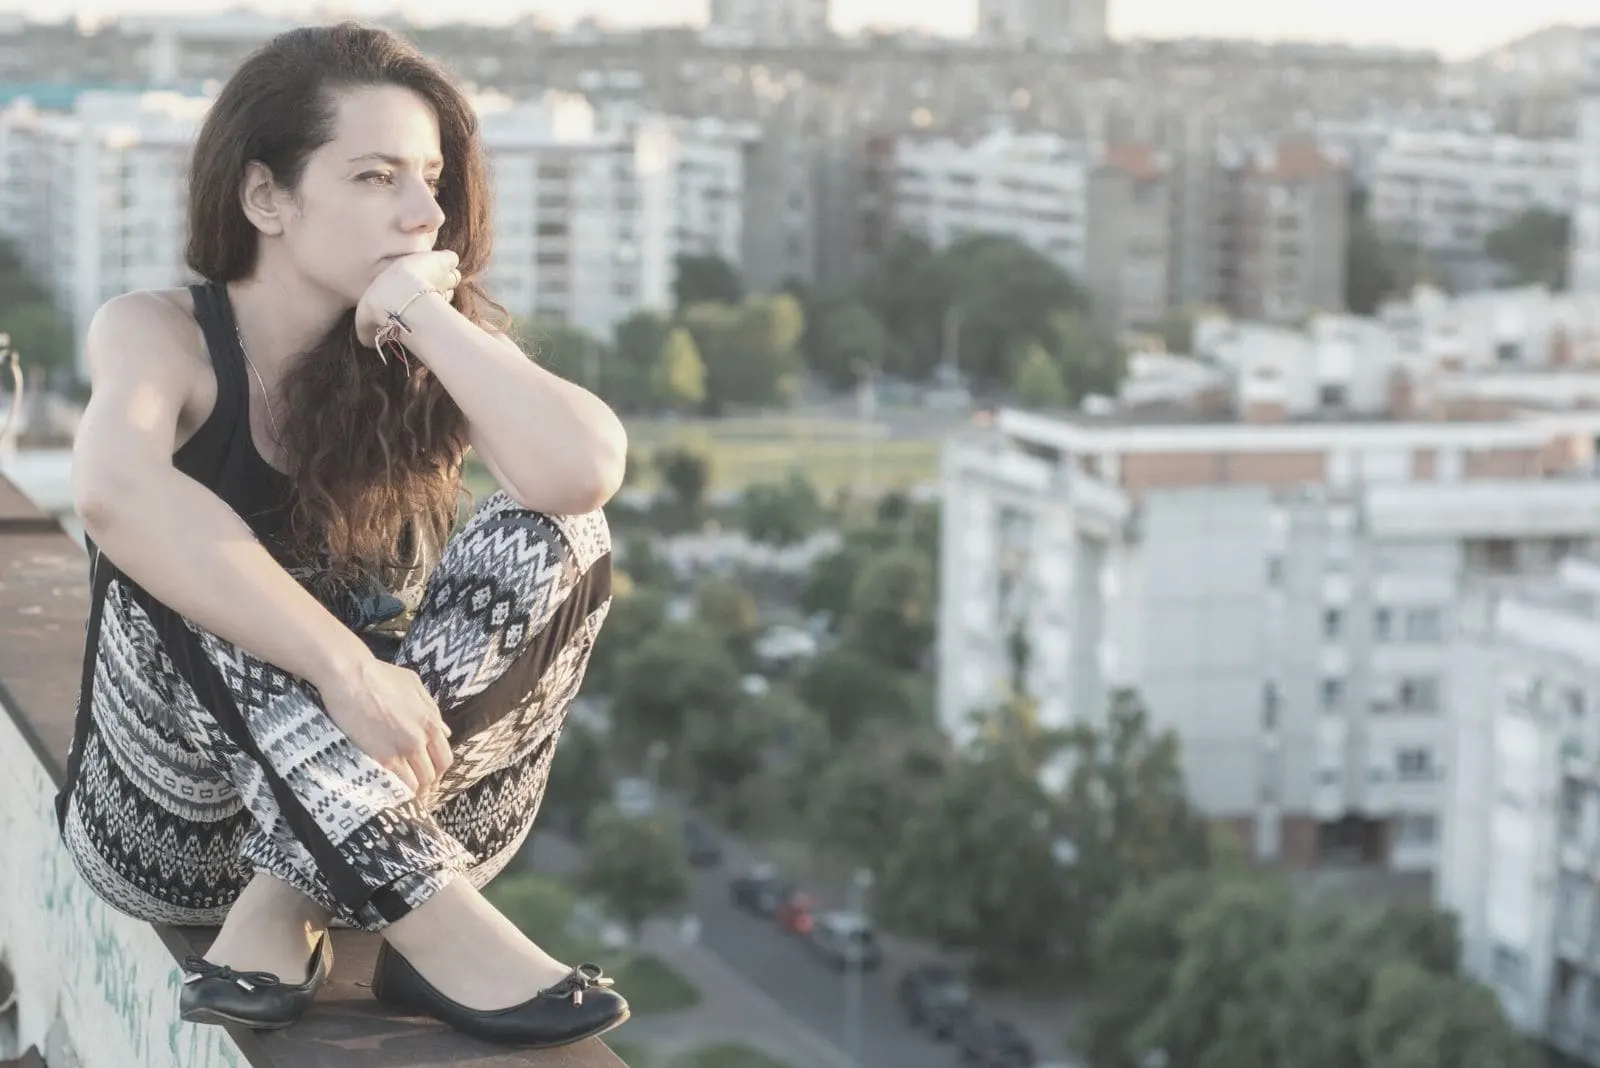 woman sitting on top of the ledge of the building thinking deeply